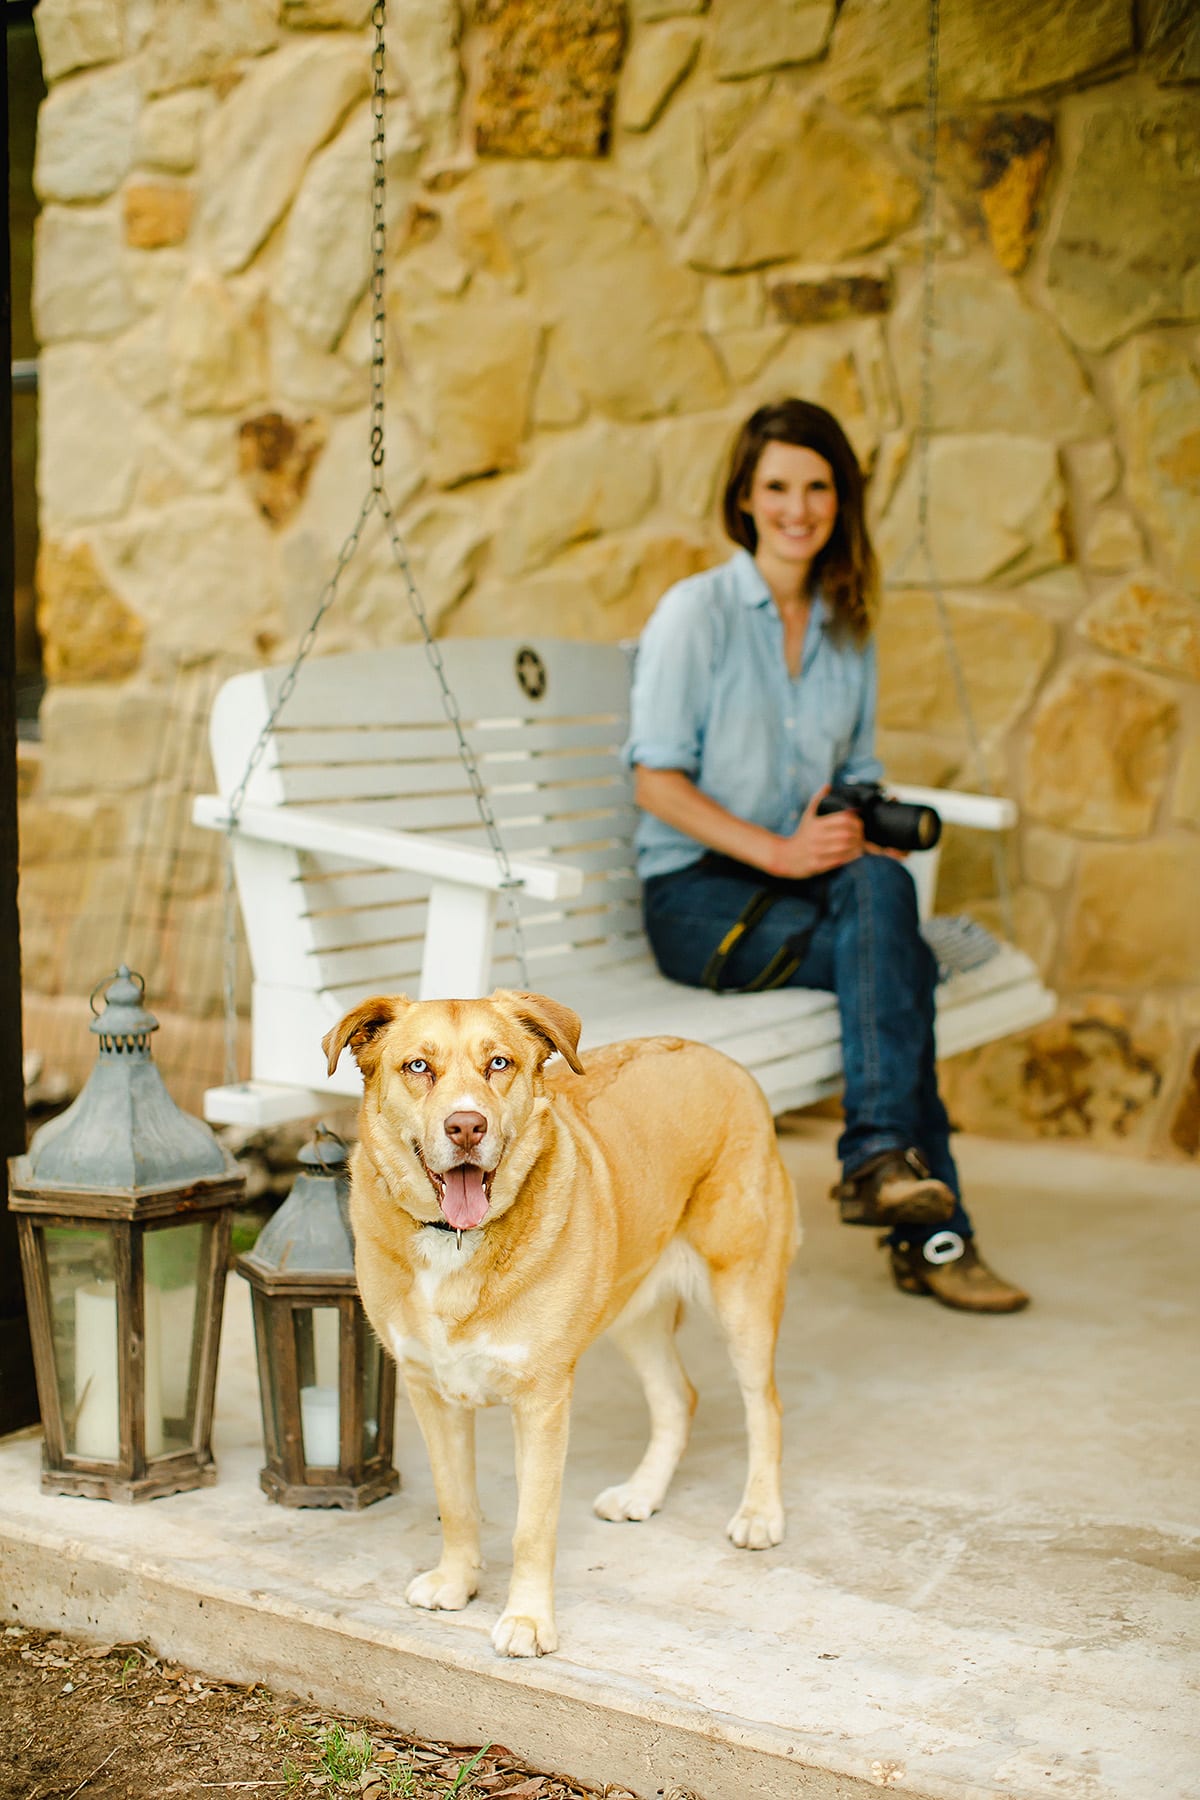 Sigrid and her dog in Driftwood, Texas